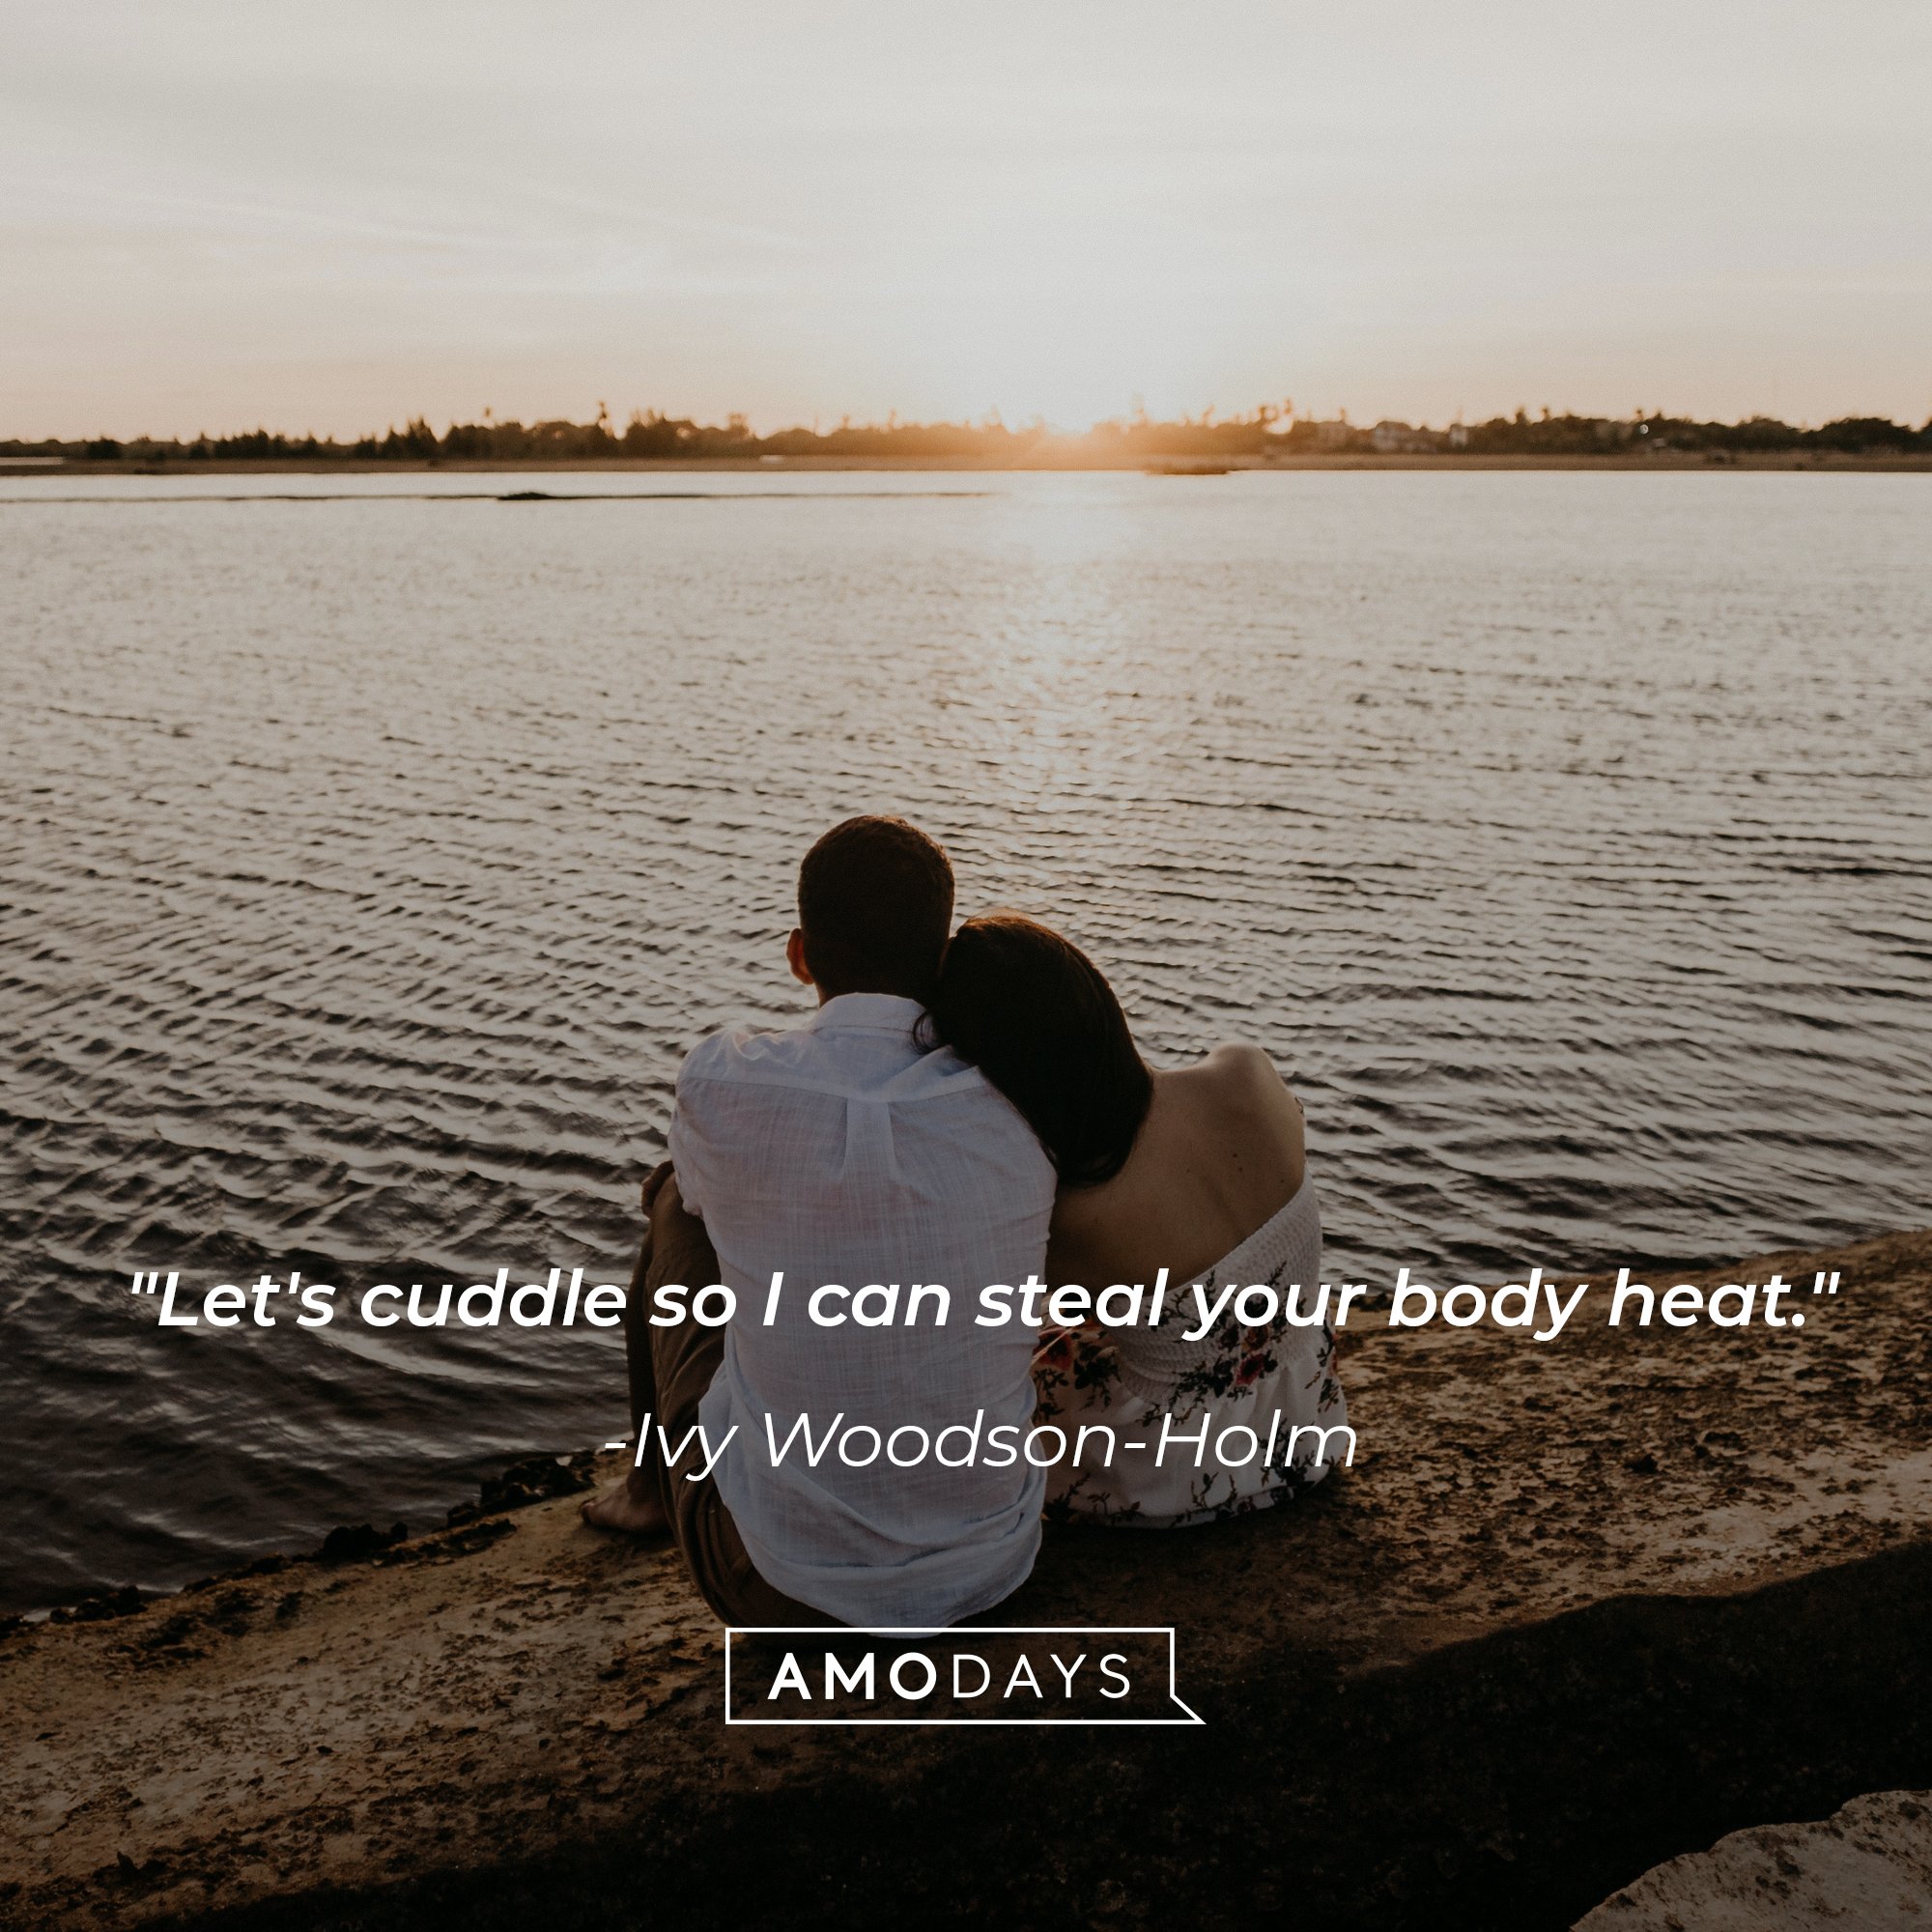 Ivy Woodson-Holm's quote: "Let's cuddle so I can steal your body heat." | Image: AmoDays